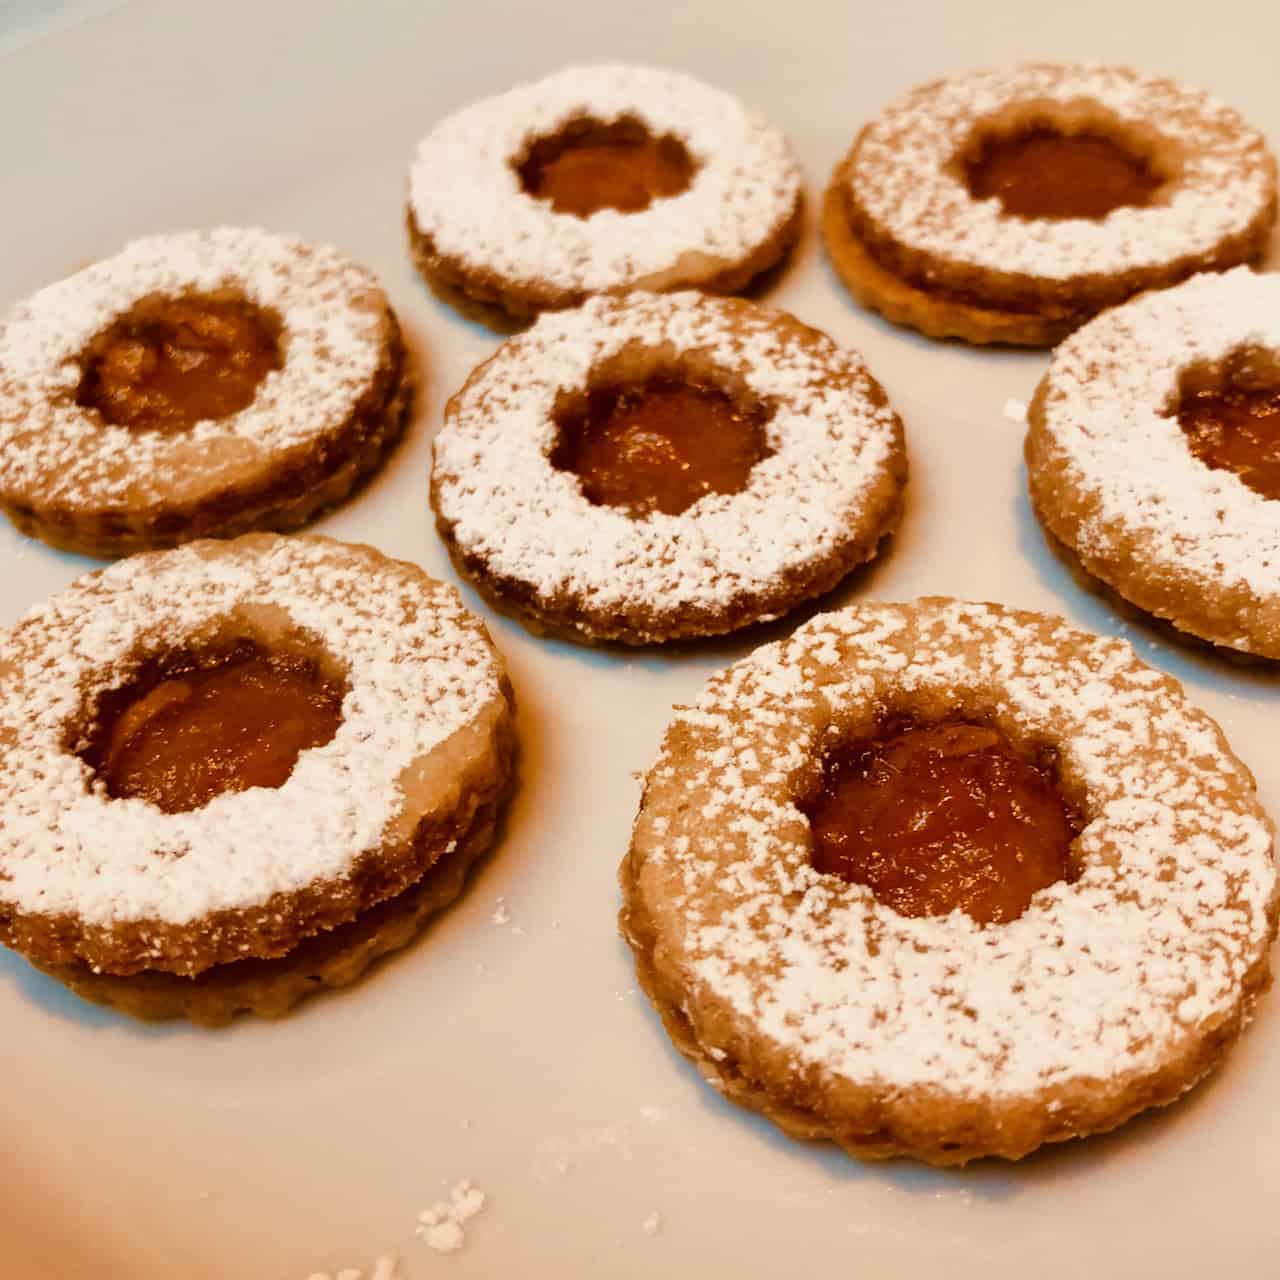 This Weekend’s Cookie: Little Rascals from Dorie Greenspan